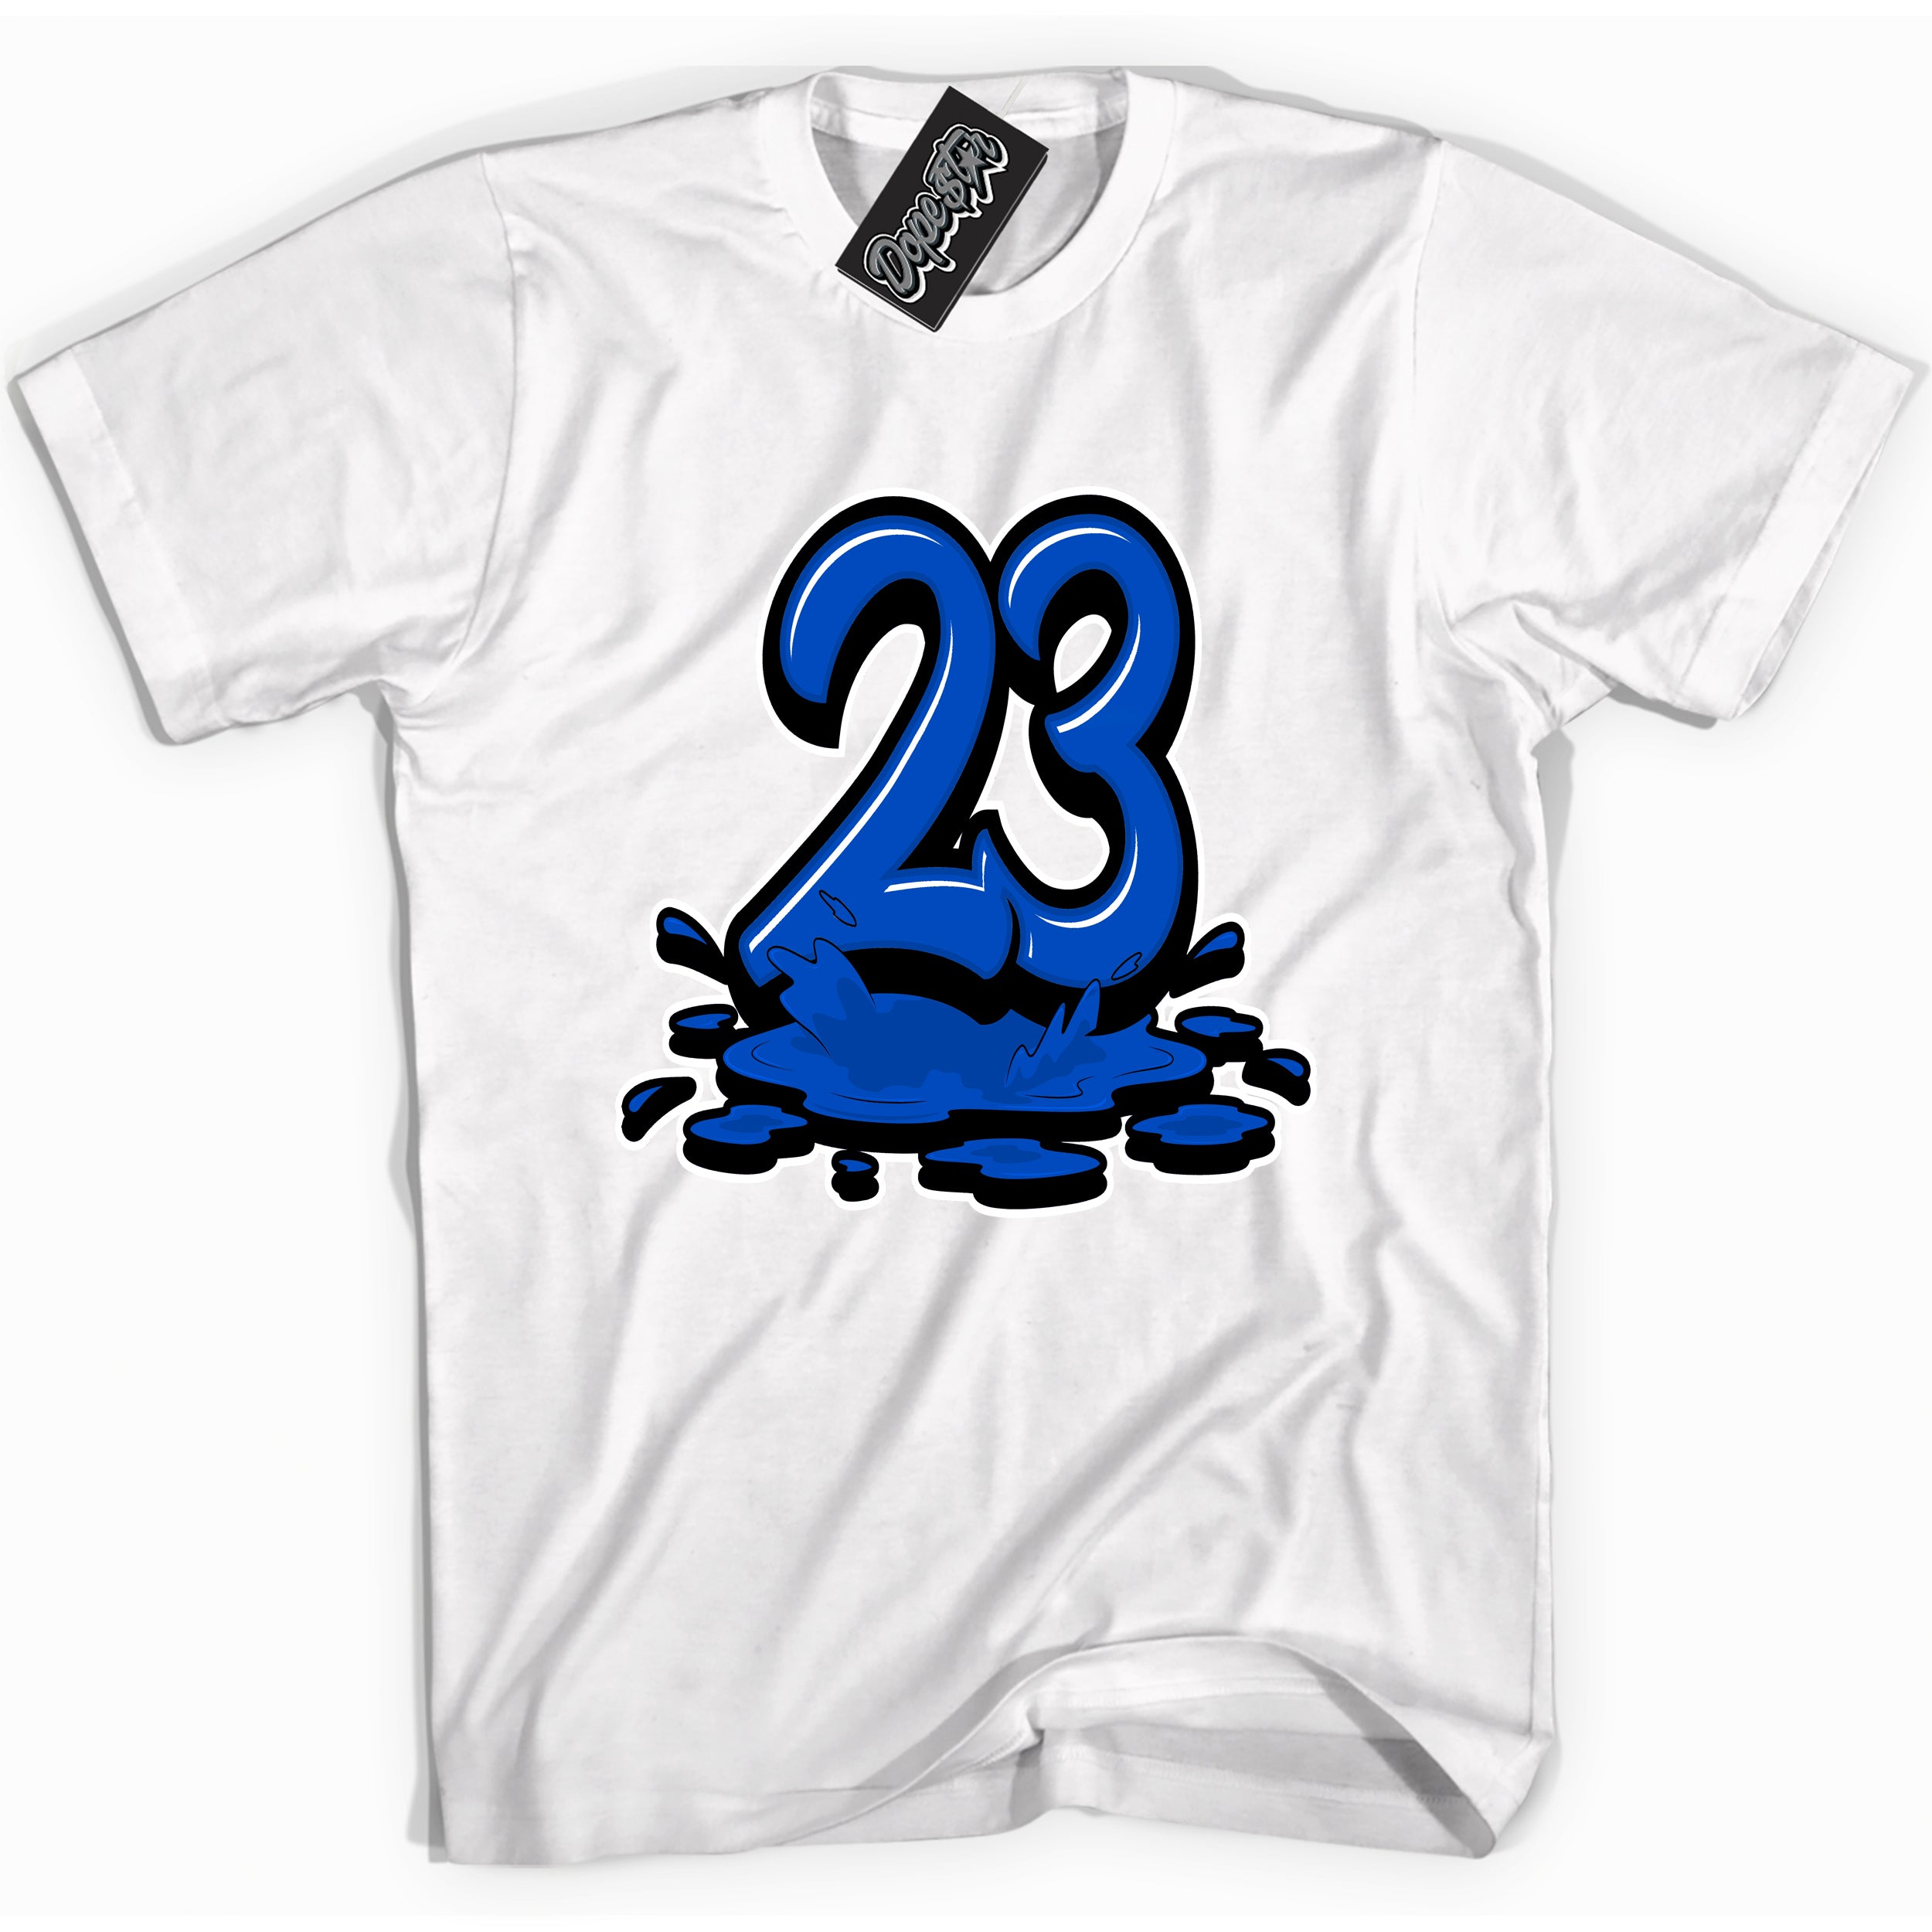 Cool White graphic tee with "23 Melting" design, that perfectly matches Royal Reimagined 1s sneakers 